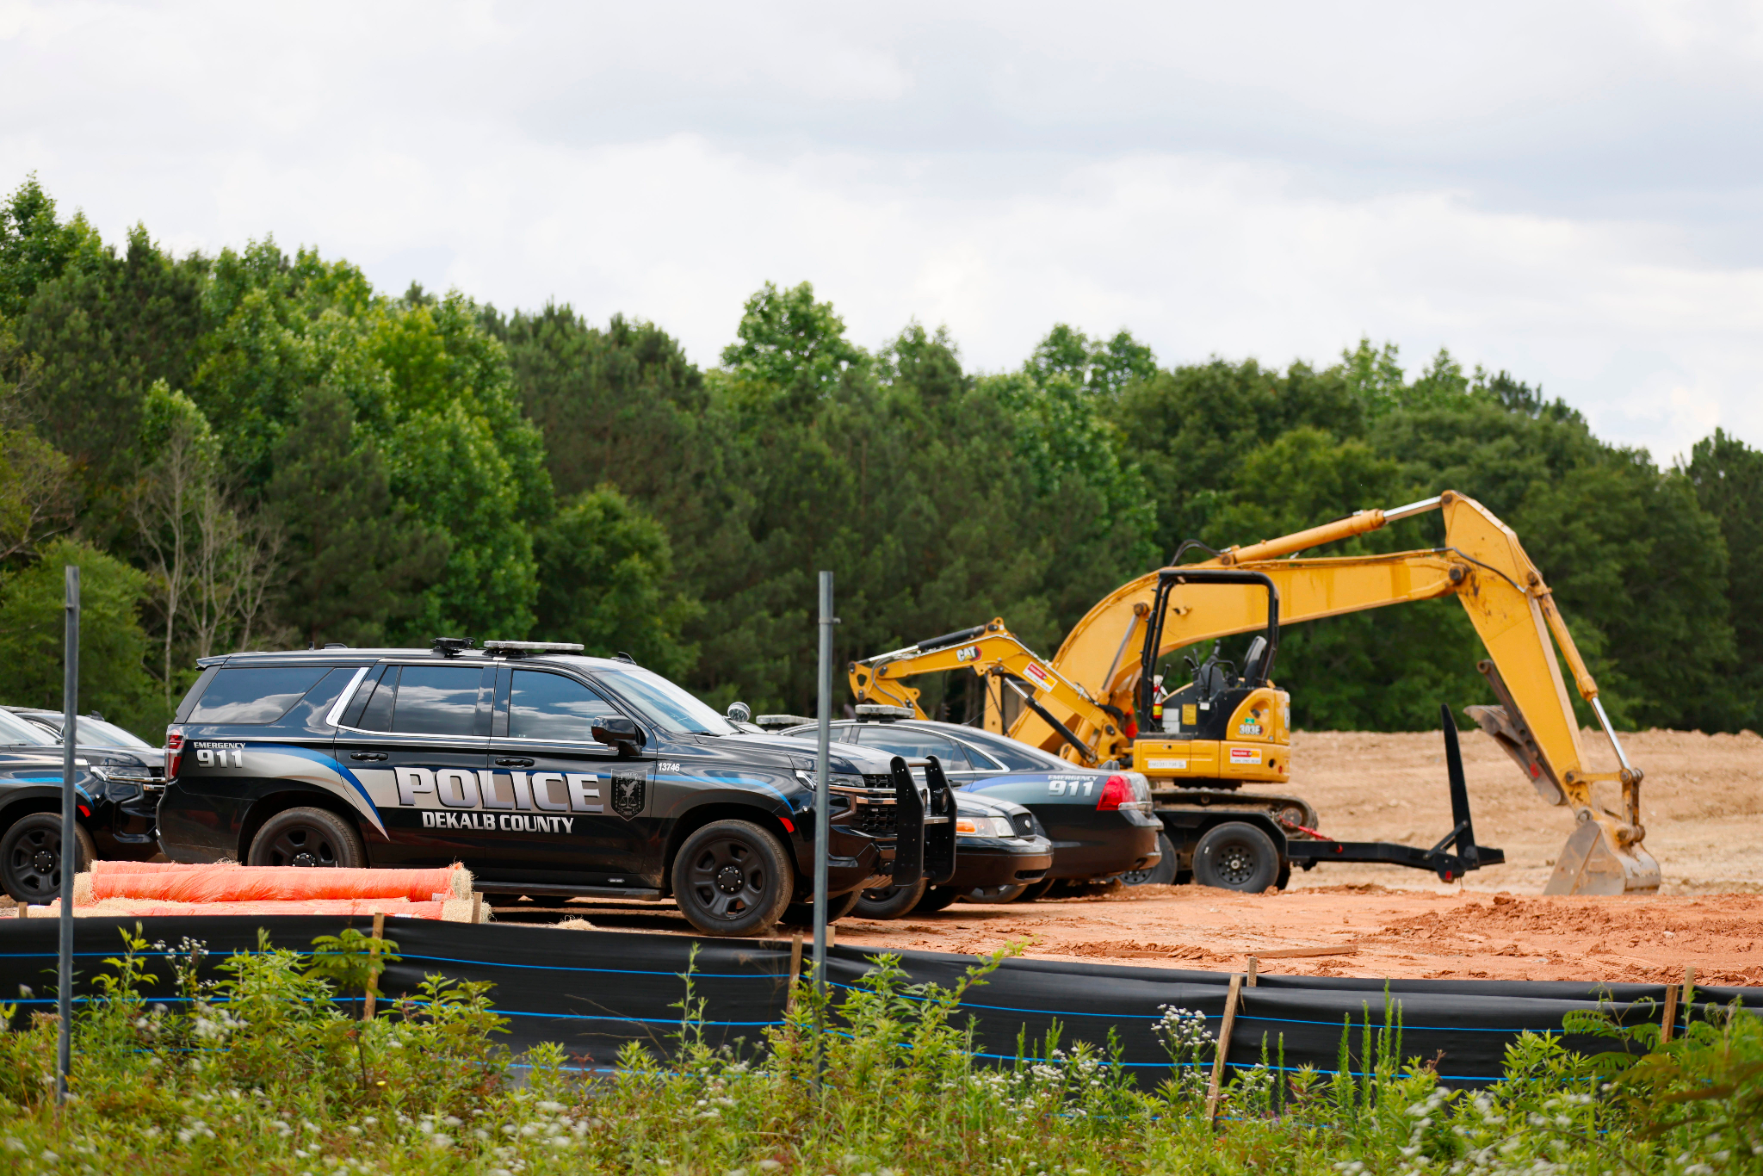 An image of police cars and construction equipment destroying the forest to build Cop City.